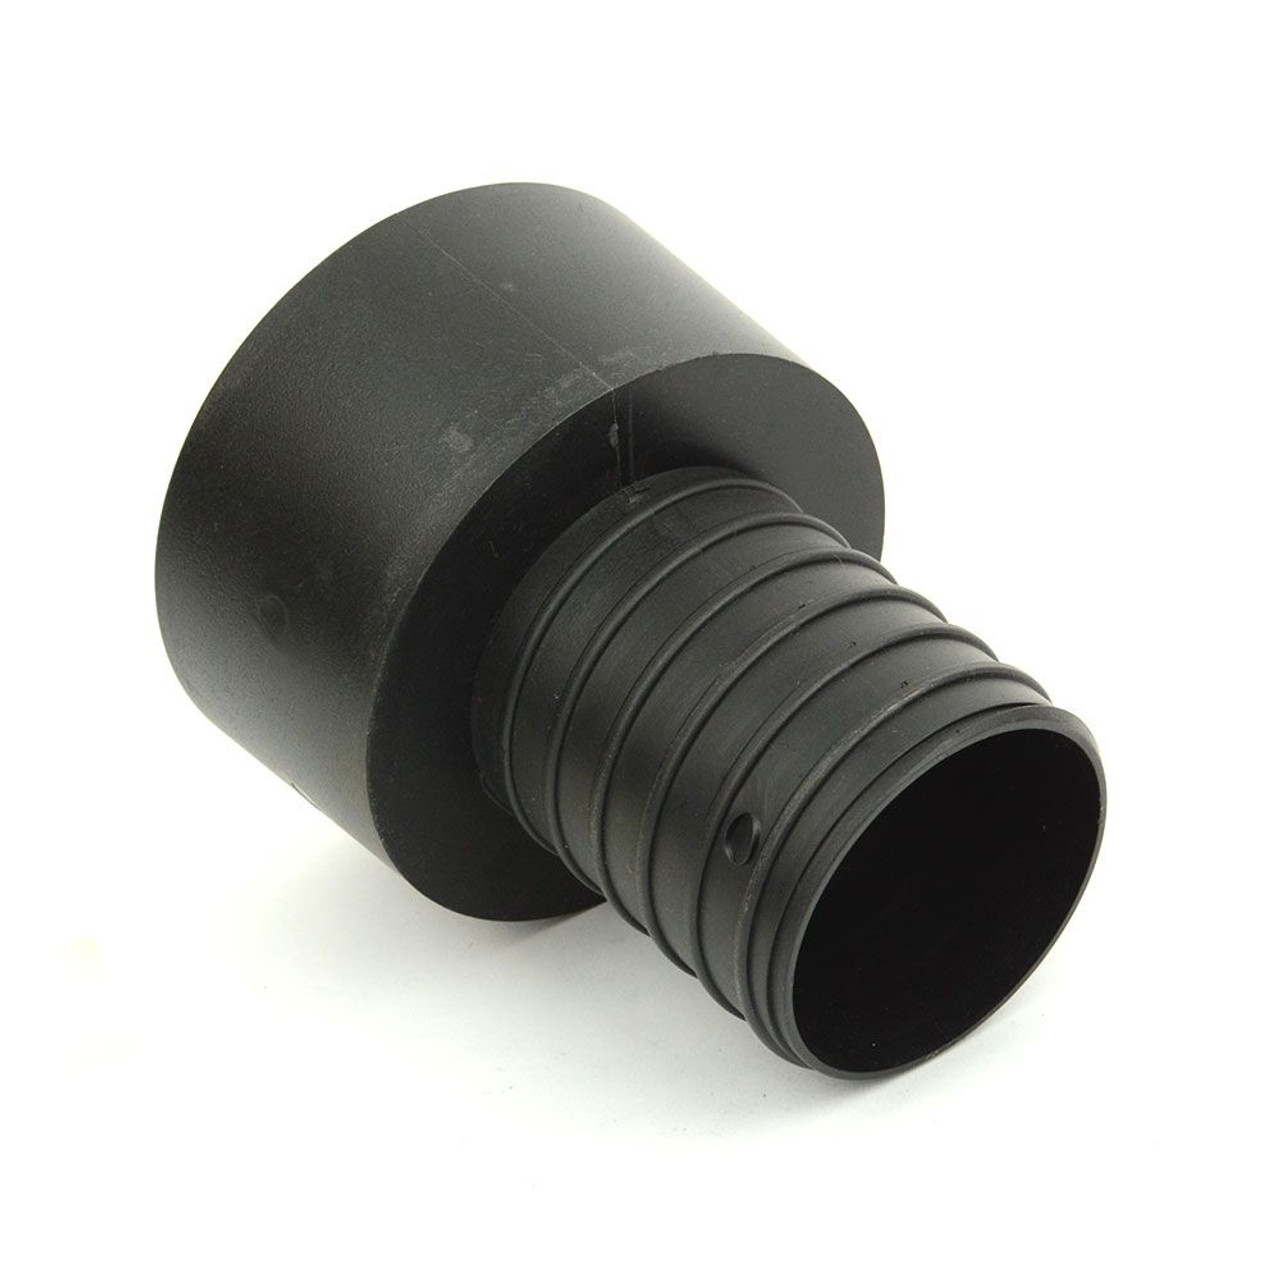 Big Horn 4 x 2-1/2 Inch Quick Adapter 11418